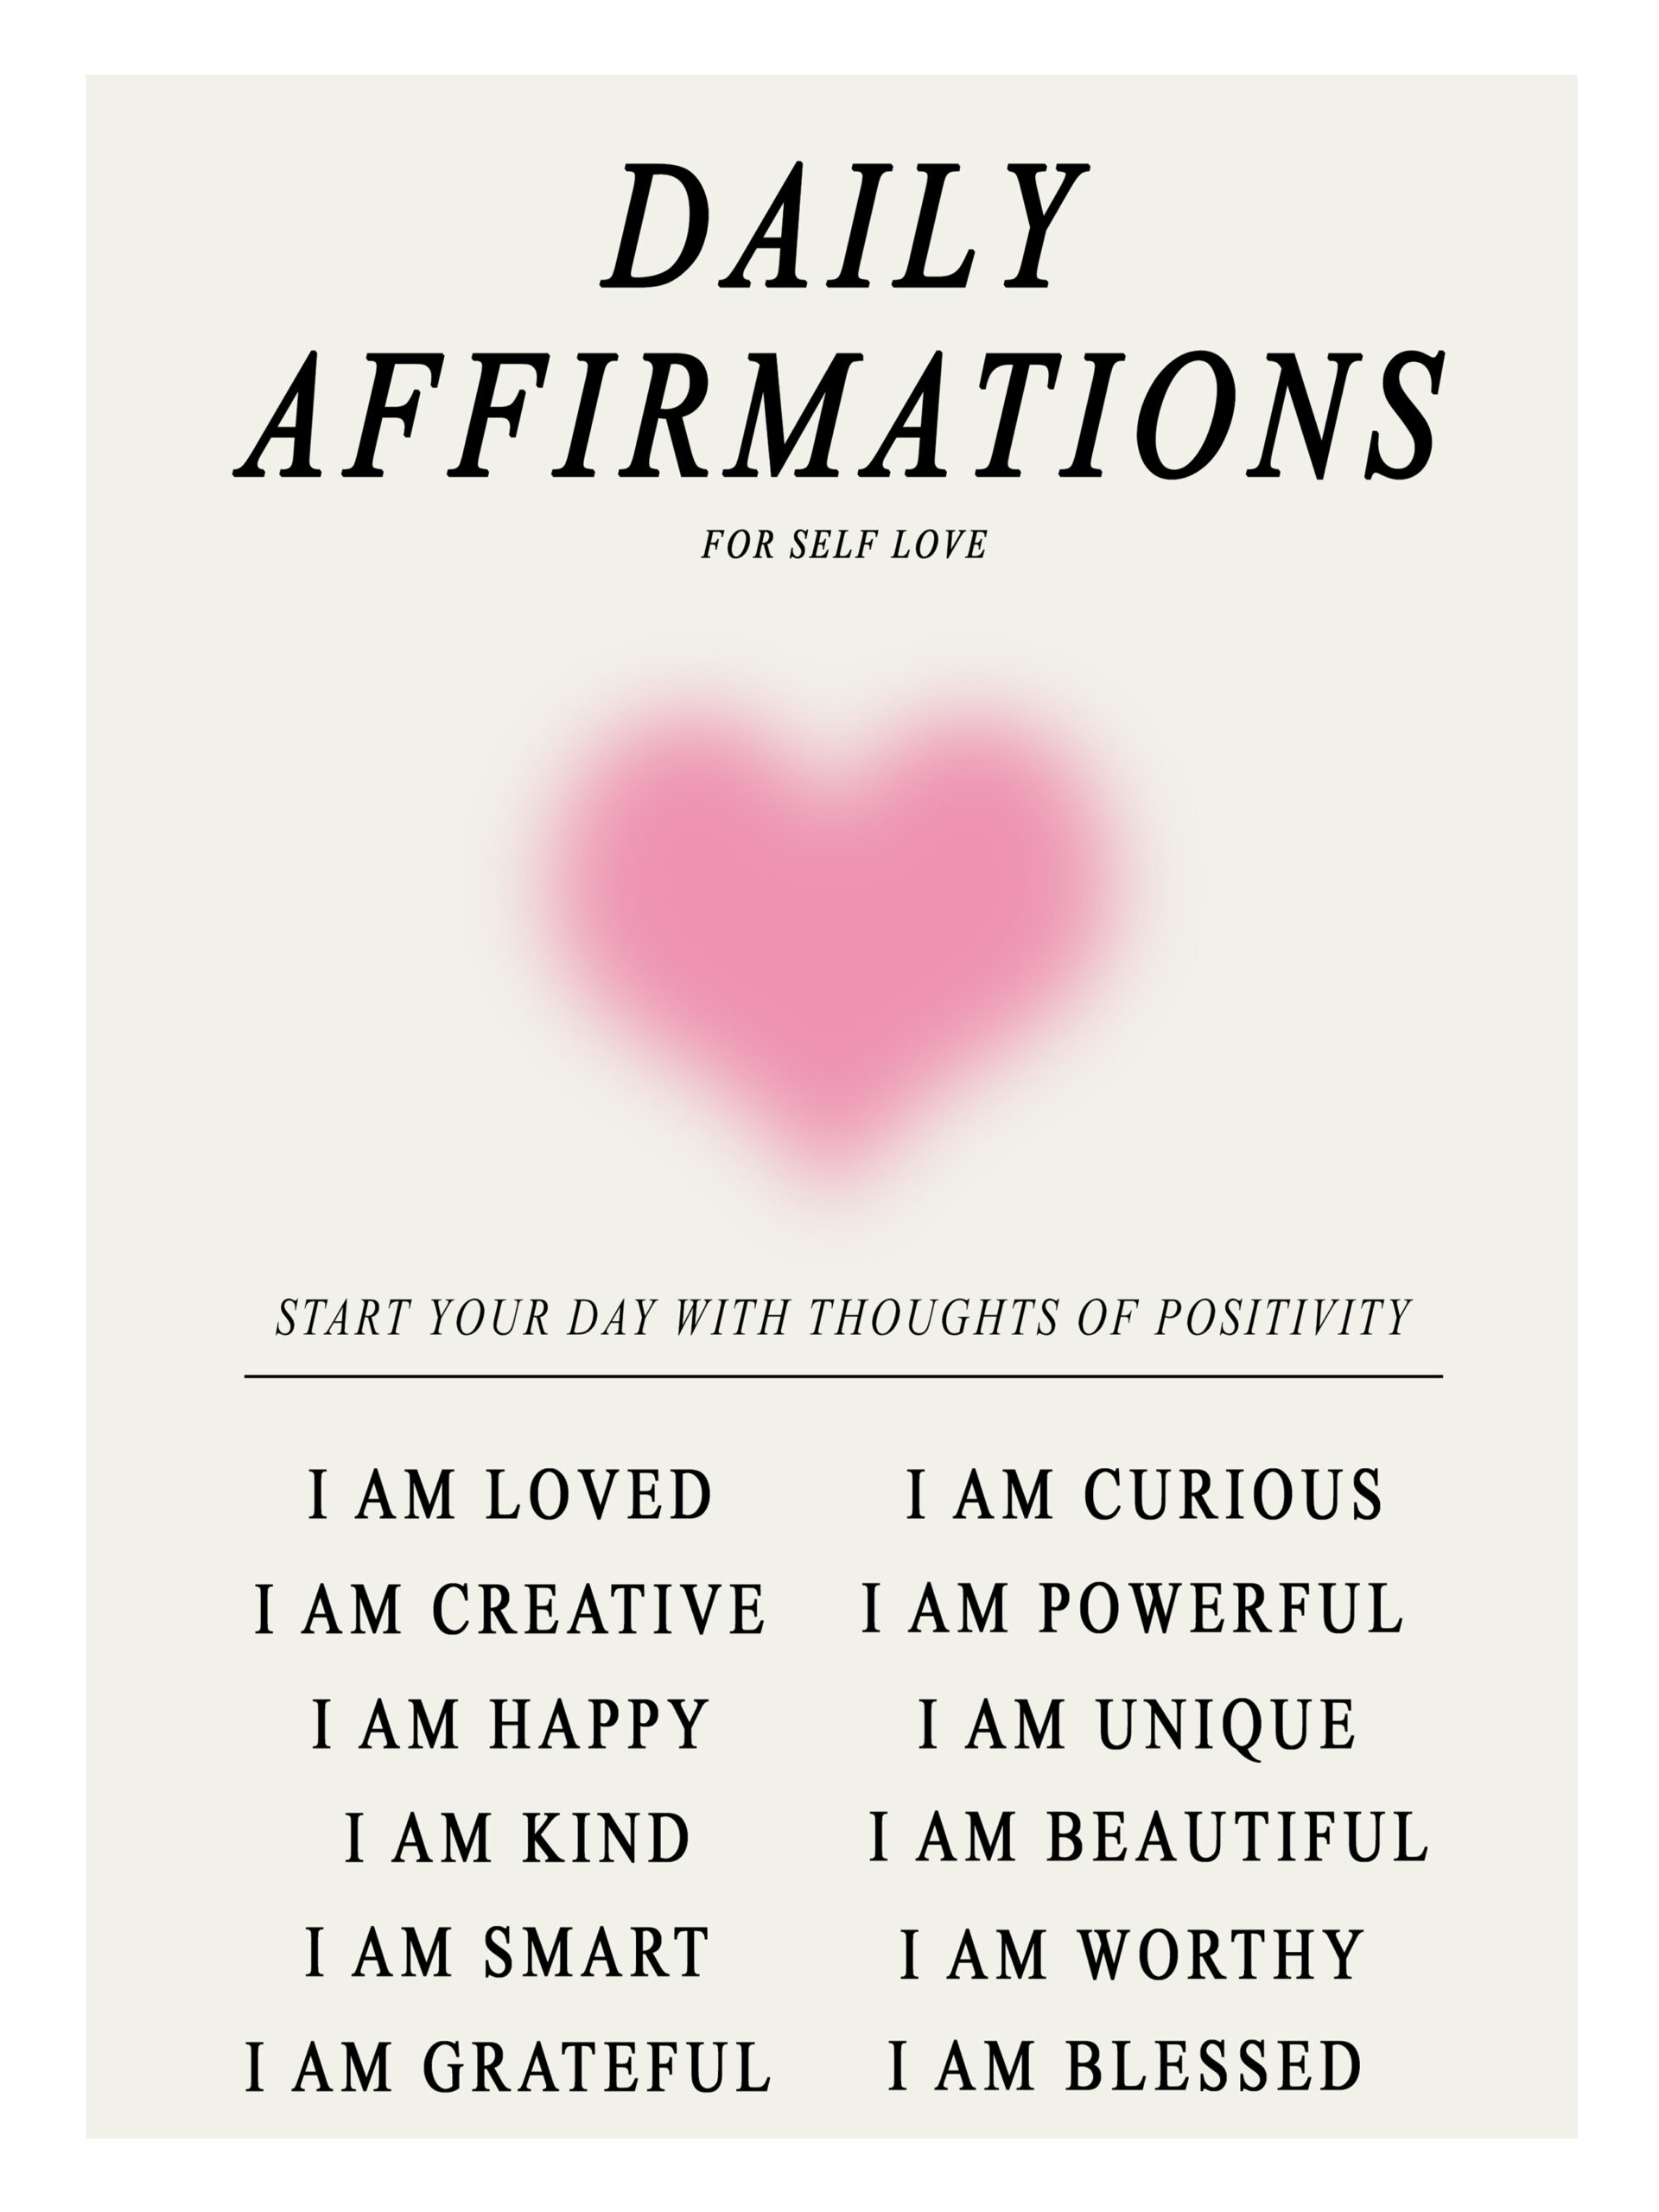 Daily affirmations